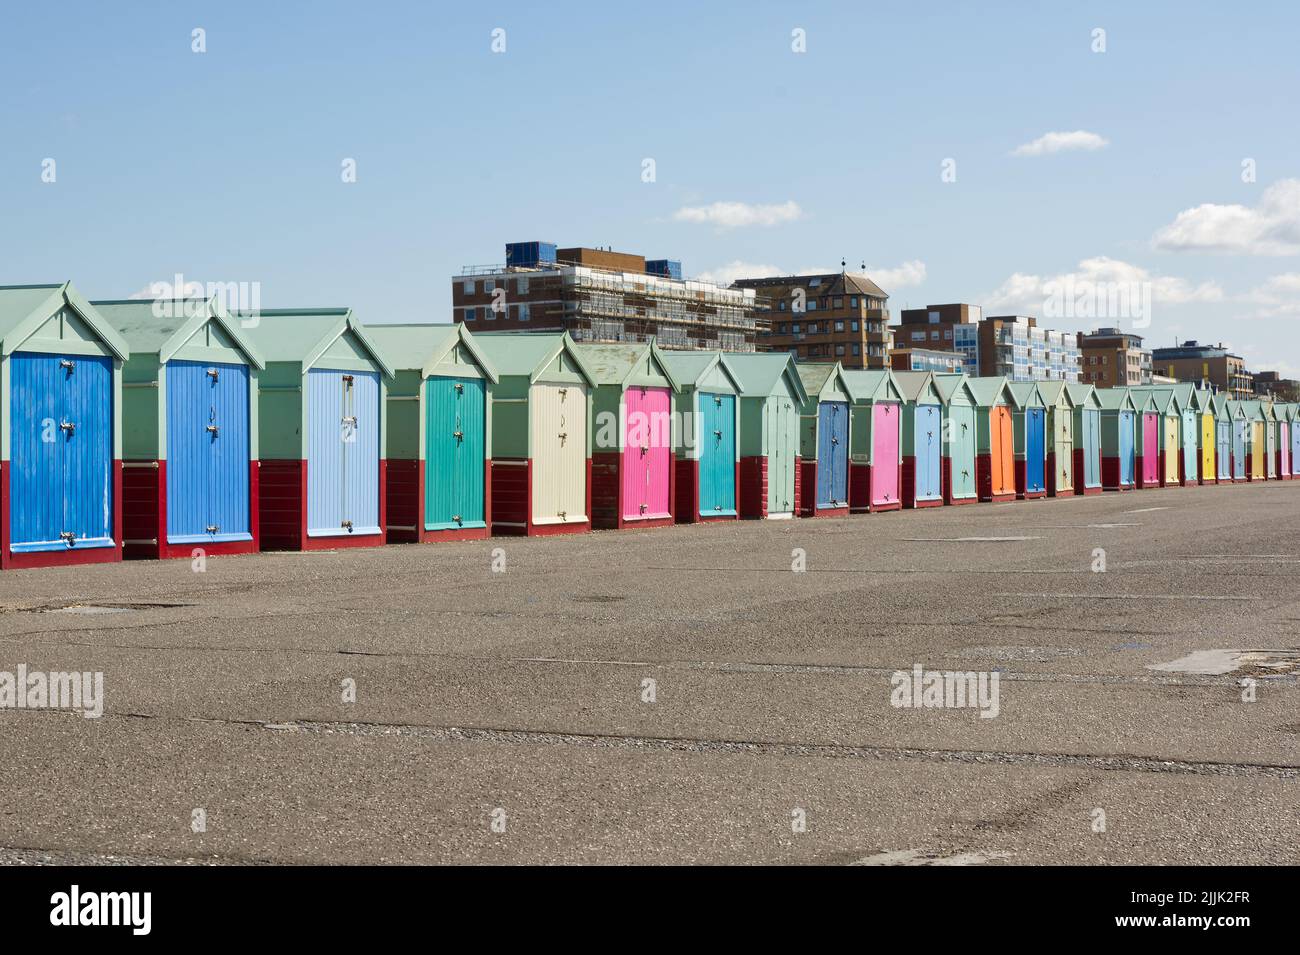 Multicoloured beach huts on the seafront promenade at Hove, Brighton in East Sussex, England Stock Photo